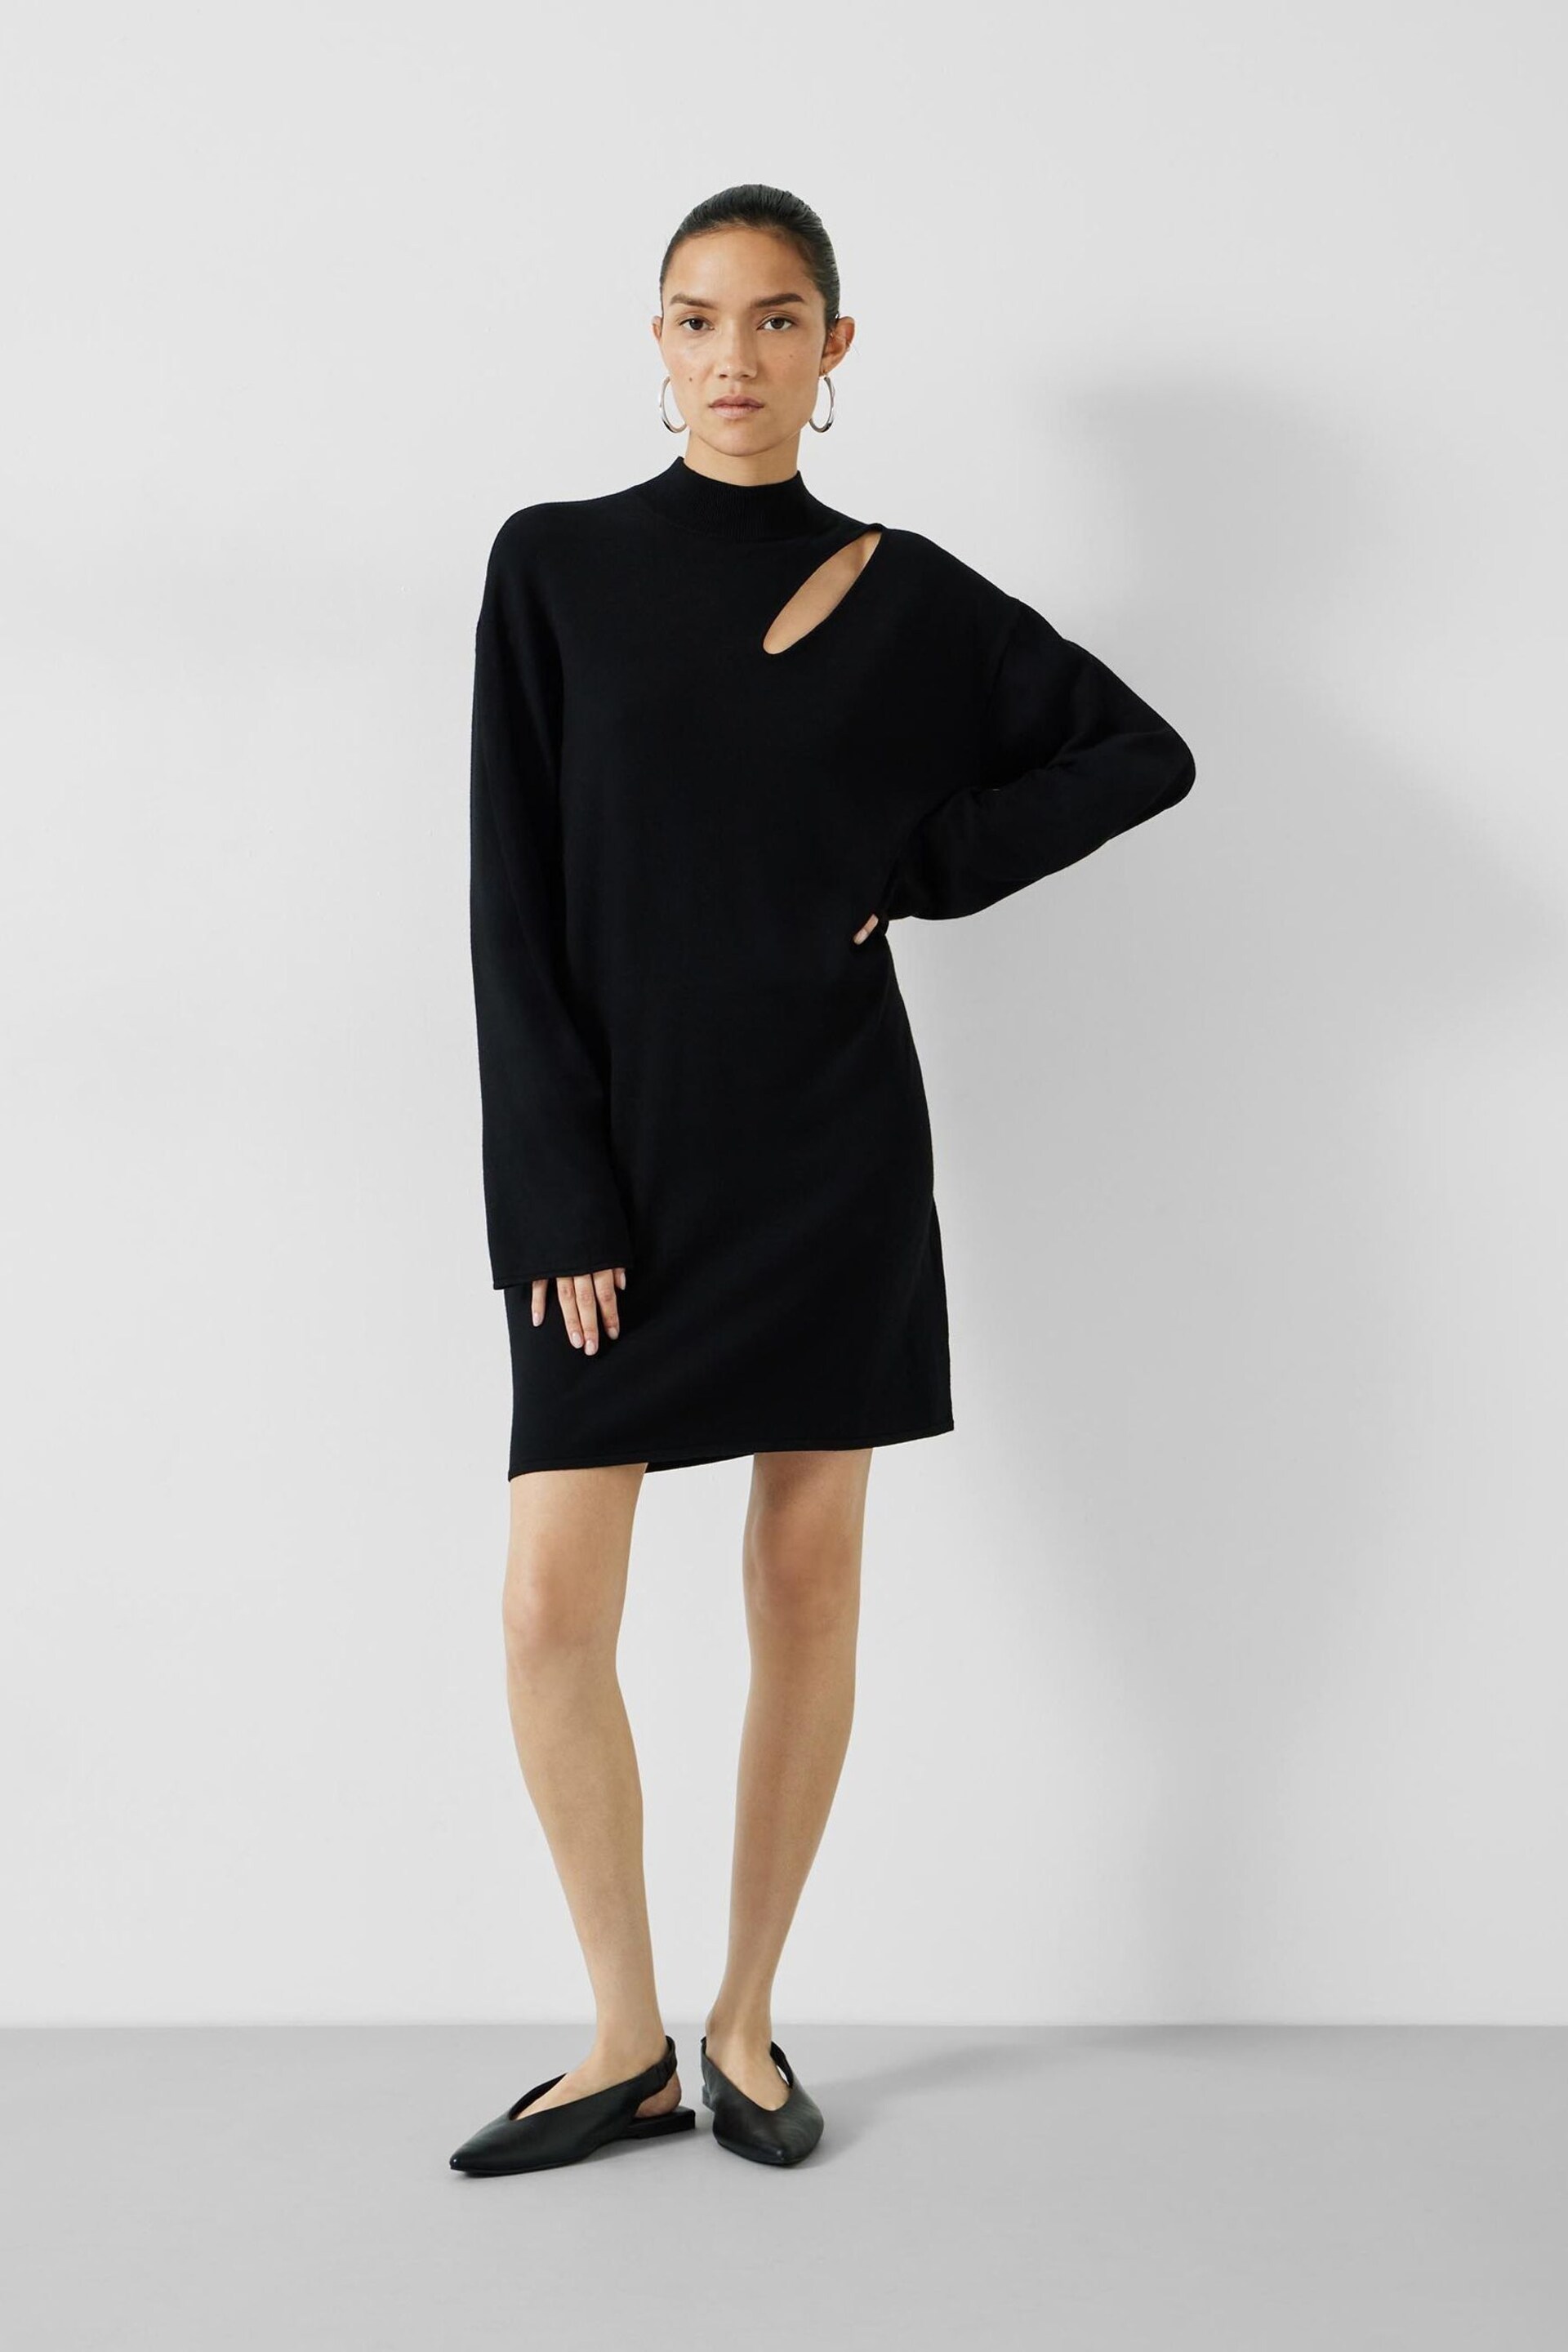 Hush Black Colby Cut Out Knitted Dress - Image 1 of 5